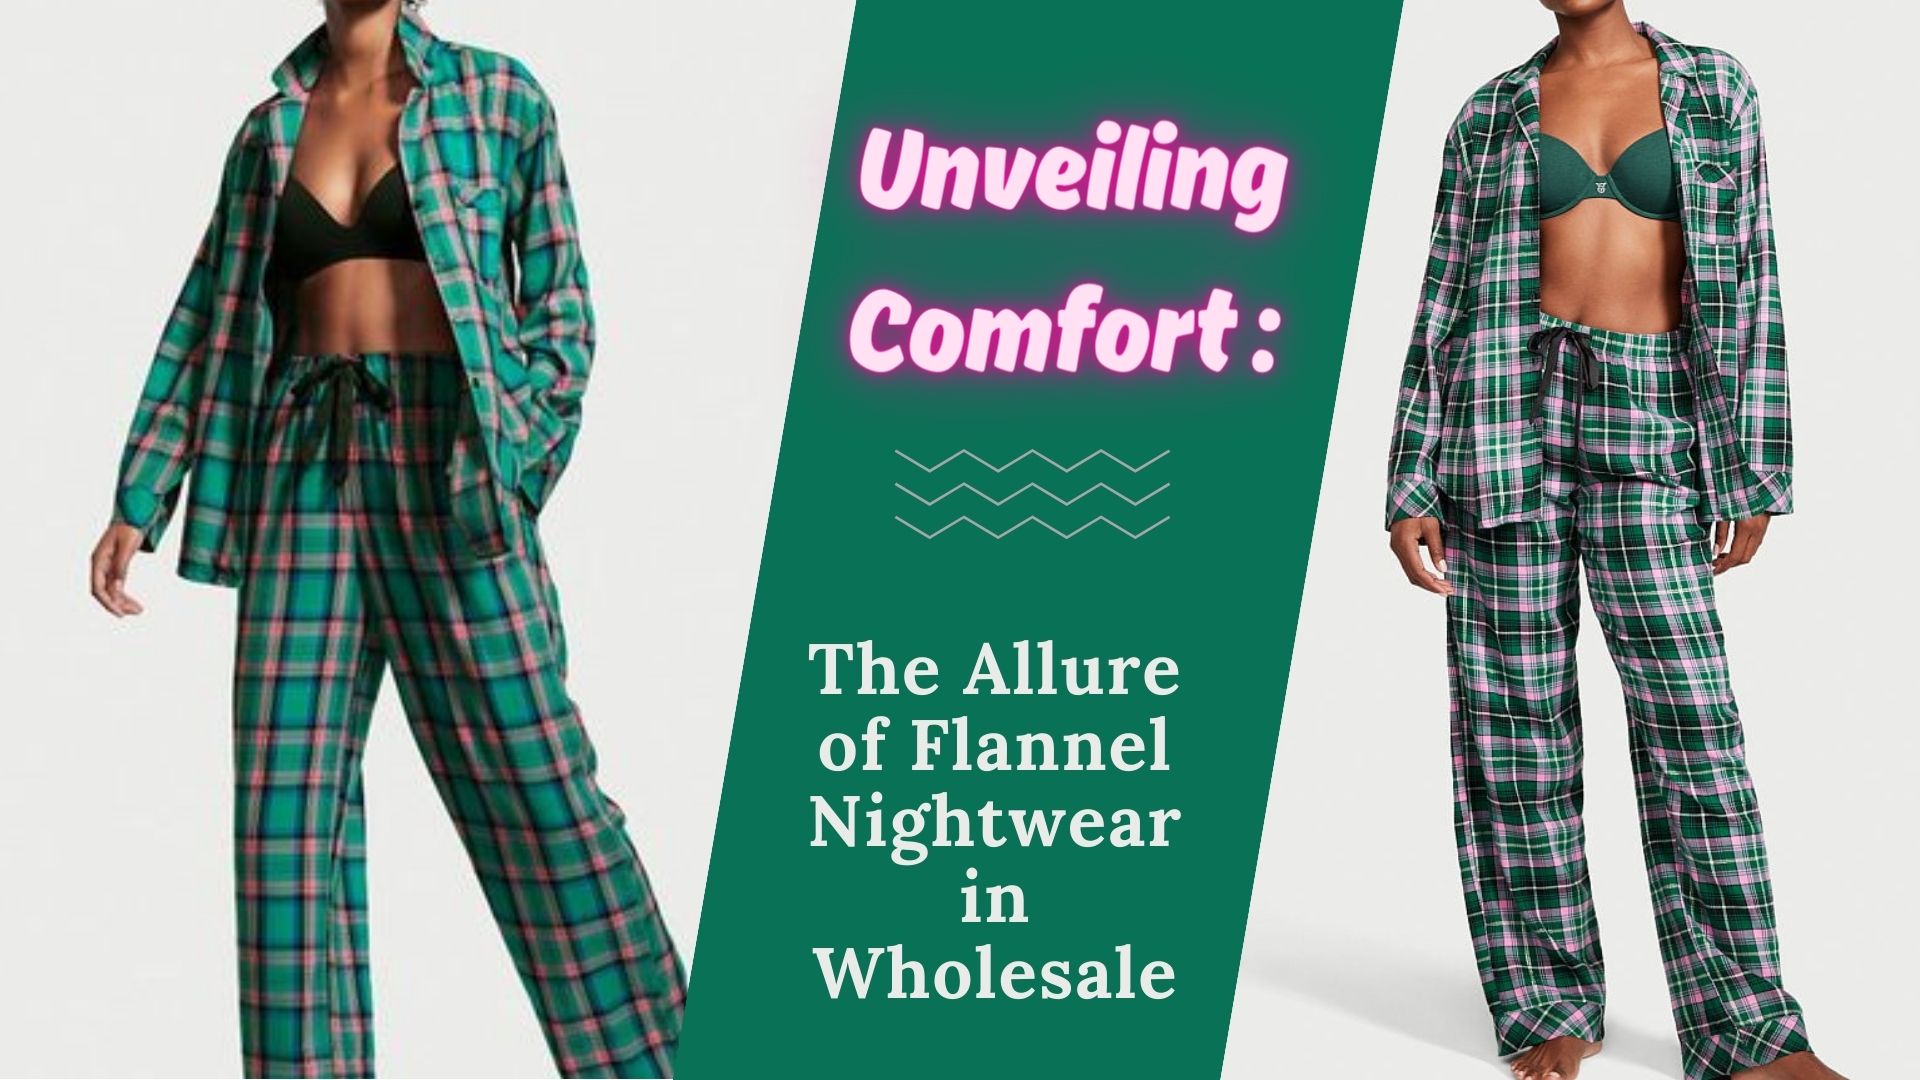 unveiling comfort the allure of flannel nightwear in wholesale